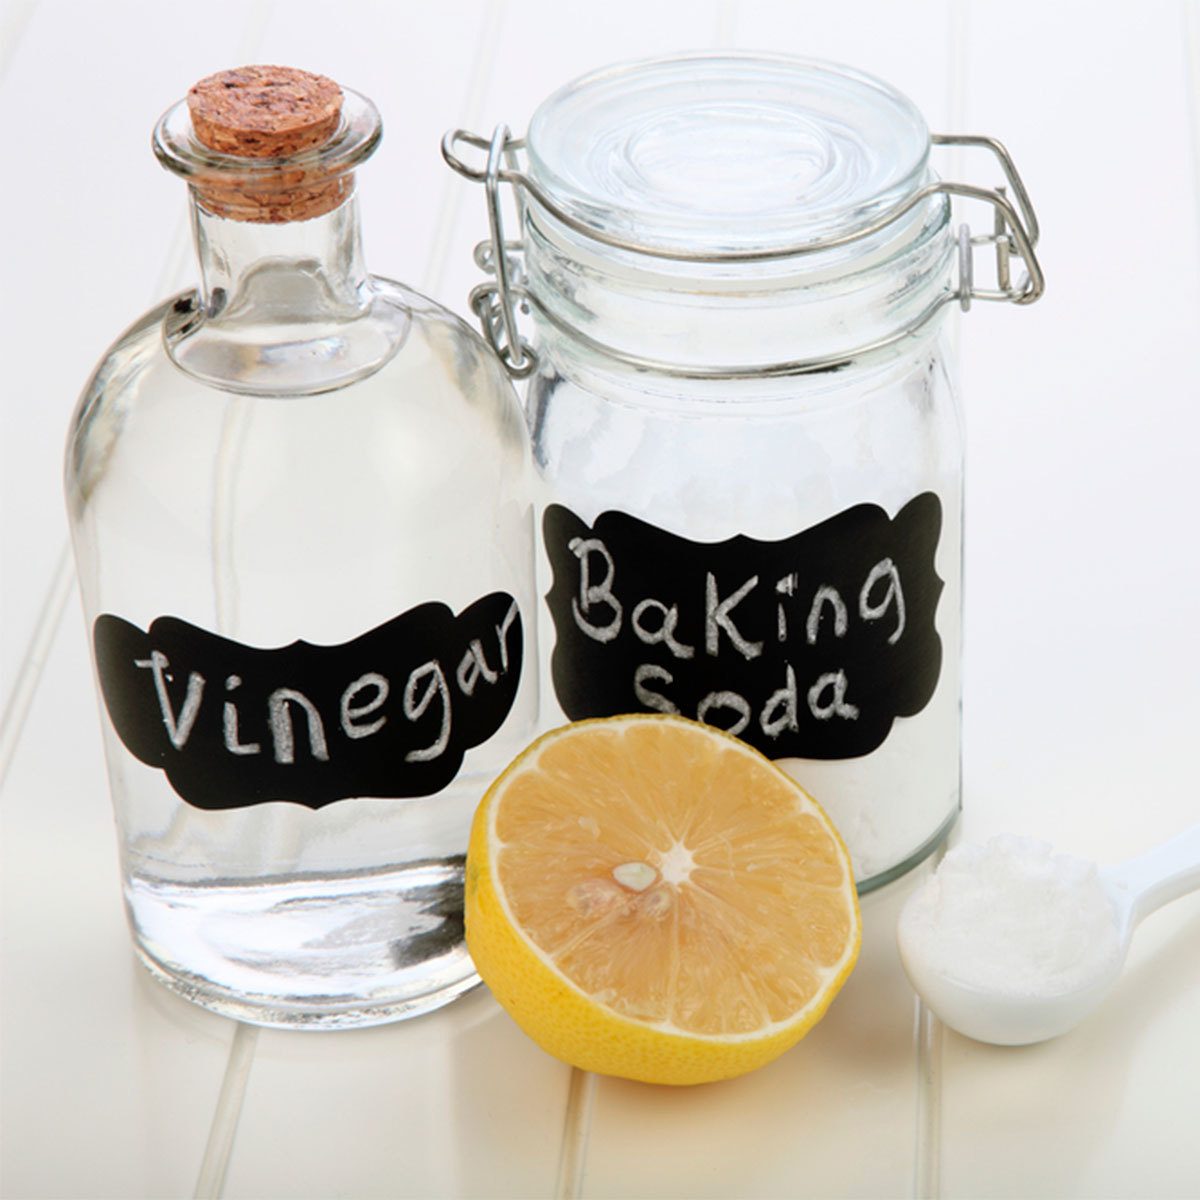 Homemade Window Cleaner With White Vinegar: Recipe and Instructions